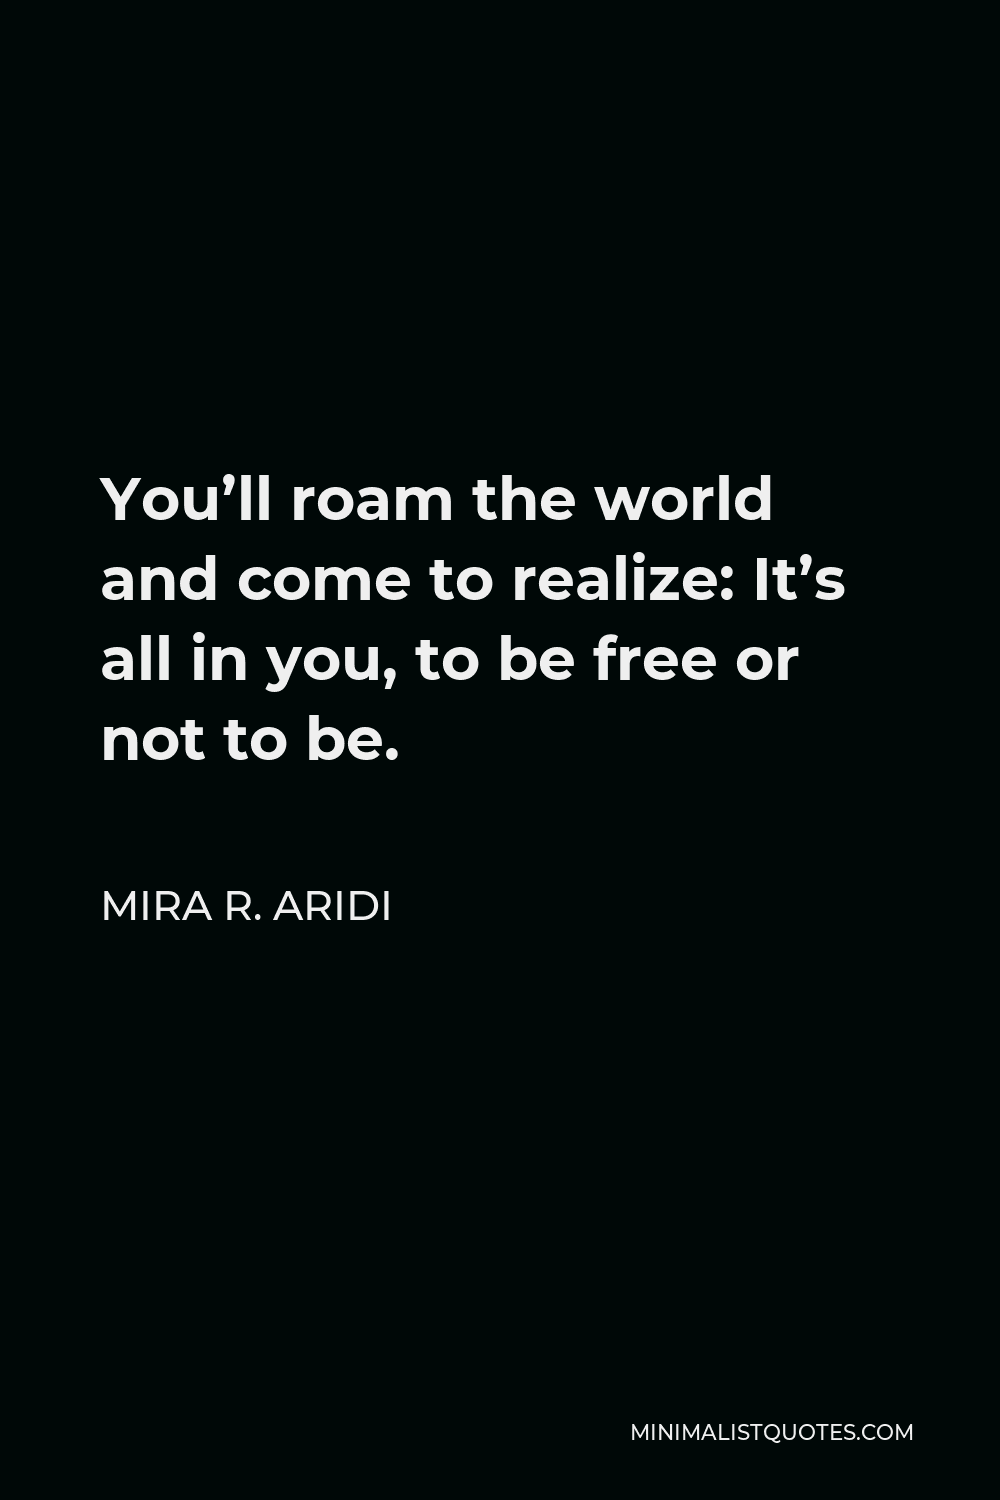 Mira R. Aridi Quote - You’ll roam the world and come to realize: It’s all in you, to be free or not to be.